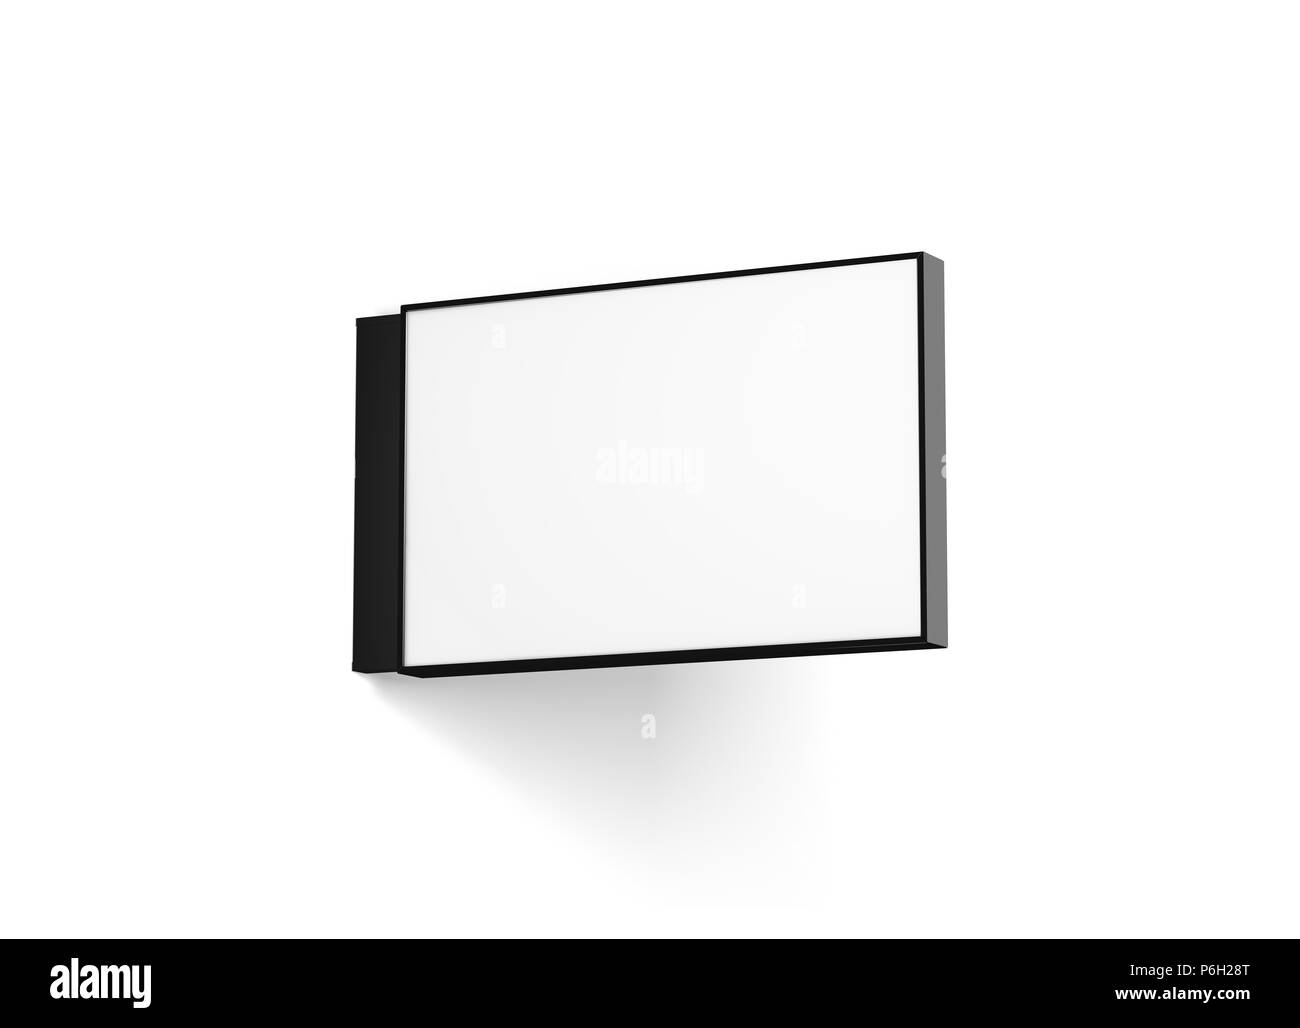 Blank horizontal store signage design mockup isolated, 3d rendering. Empty rectangular light box mock up. Clear shop lightbox template. Street sign hanging, mounted on the wall. Signplate. Stock Photo